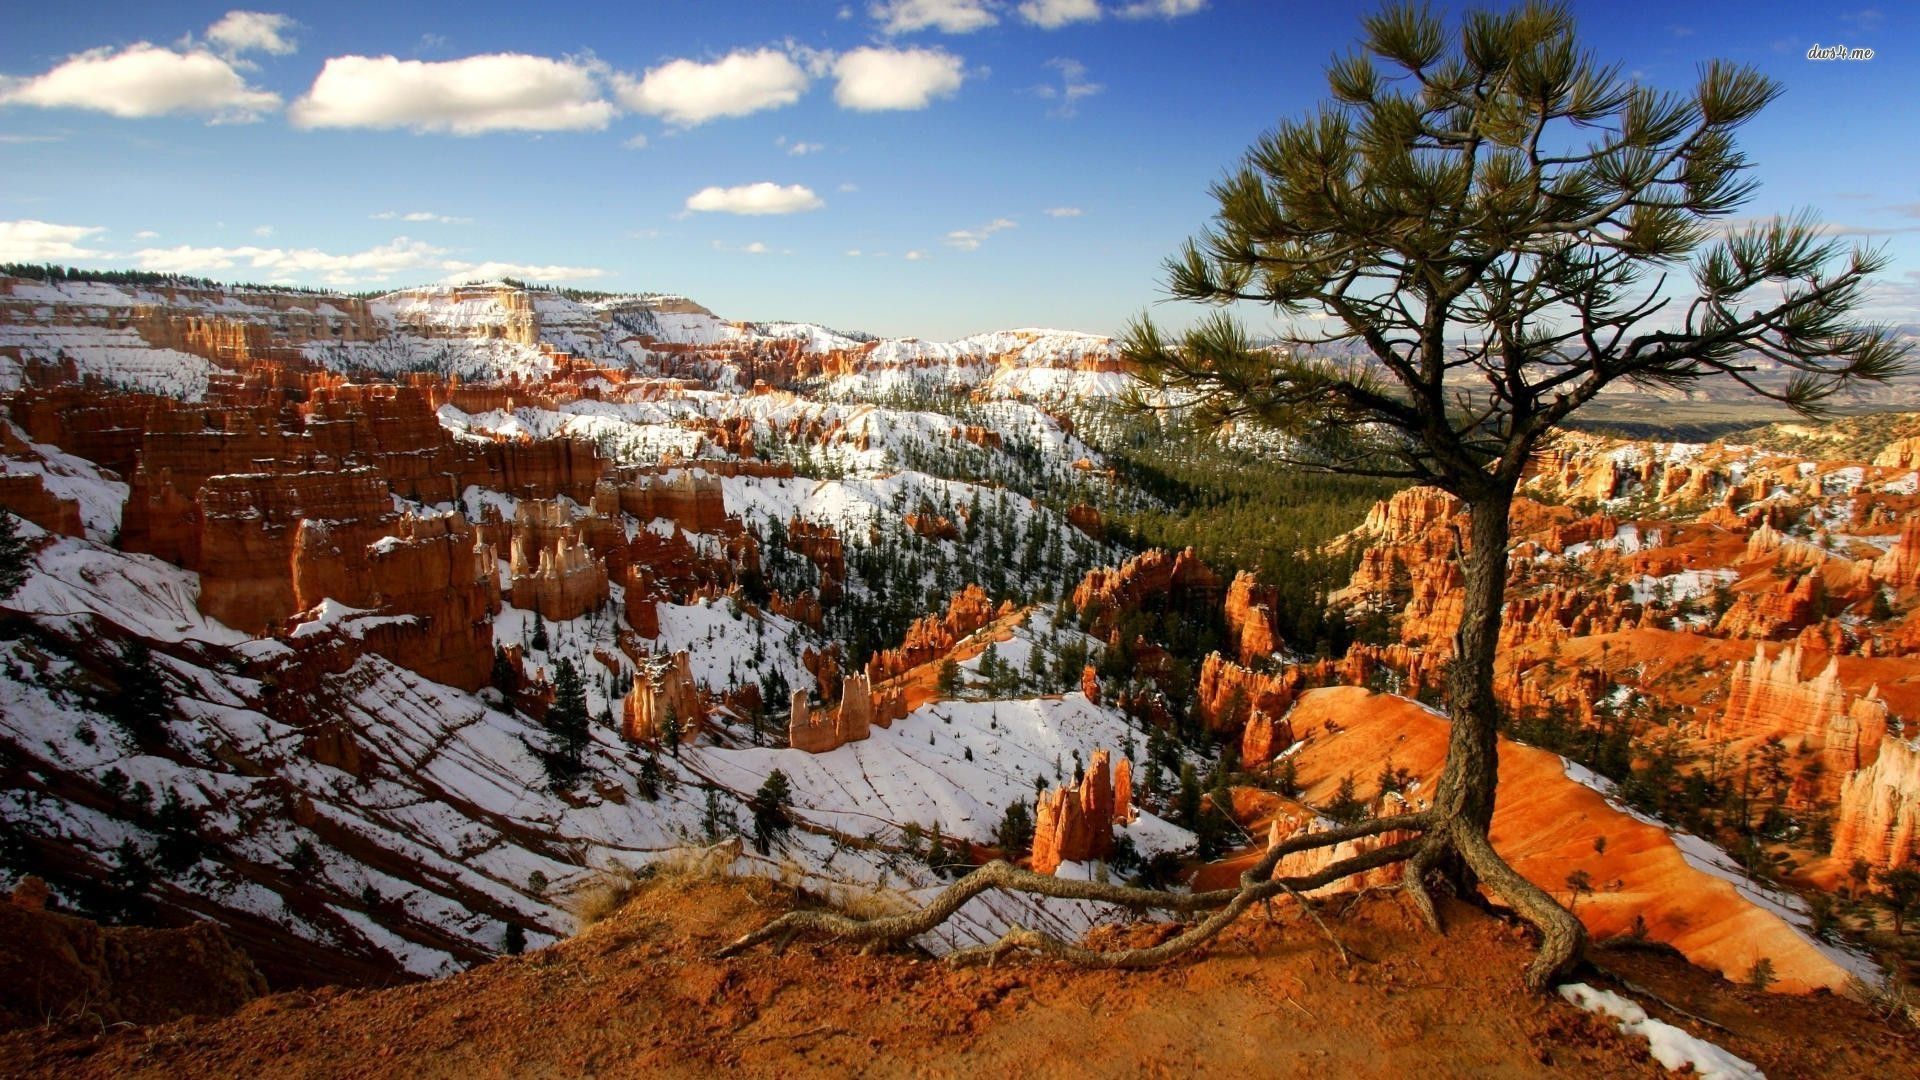 Free download Bryce Canyon National Park Wallpaper 18 1920 X 1080